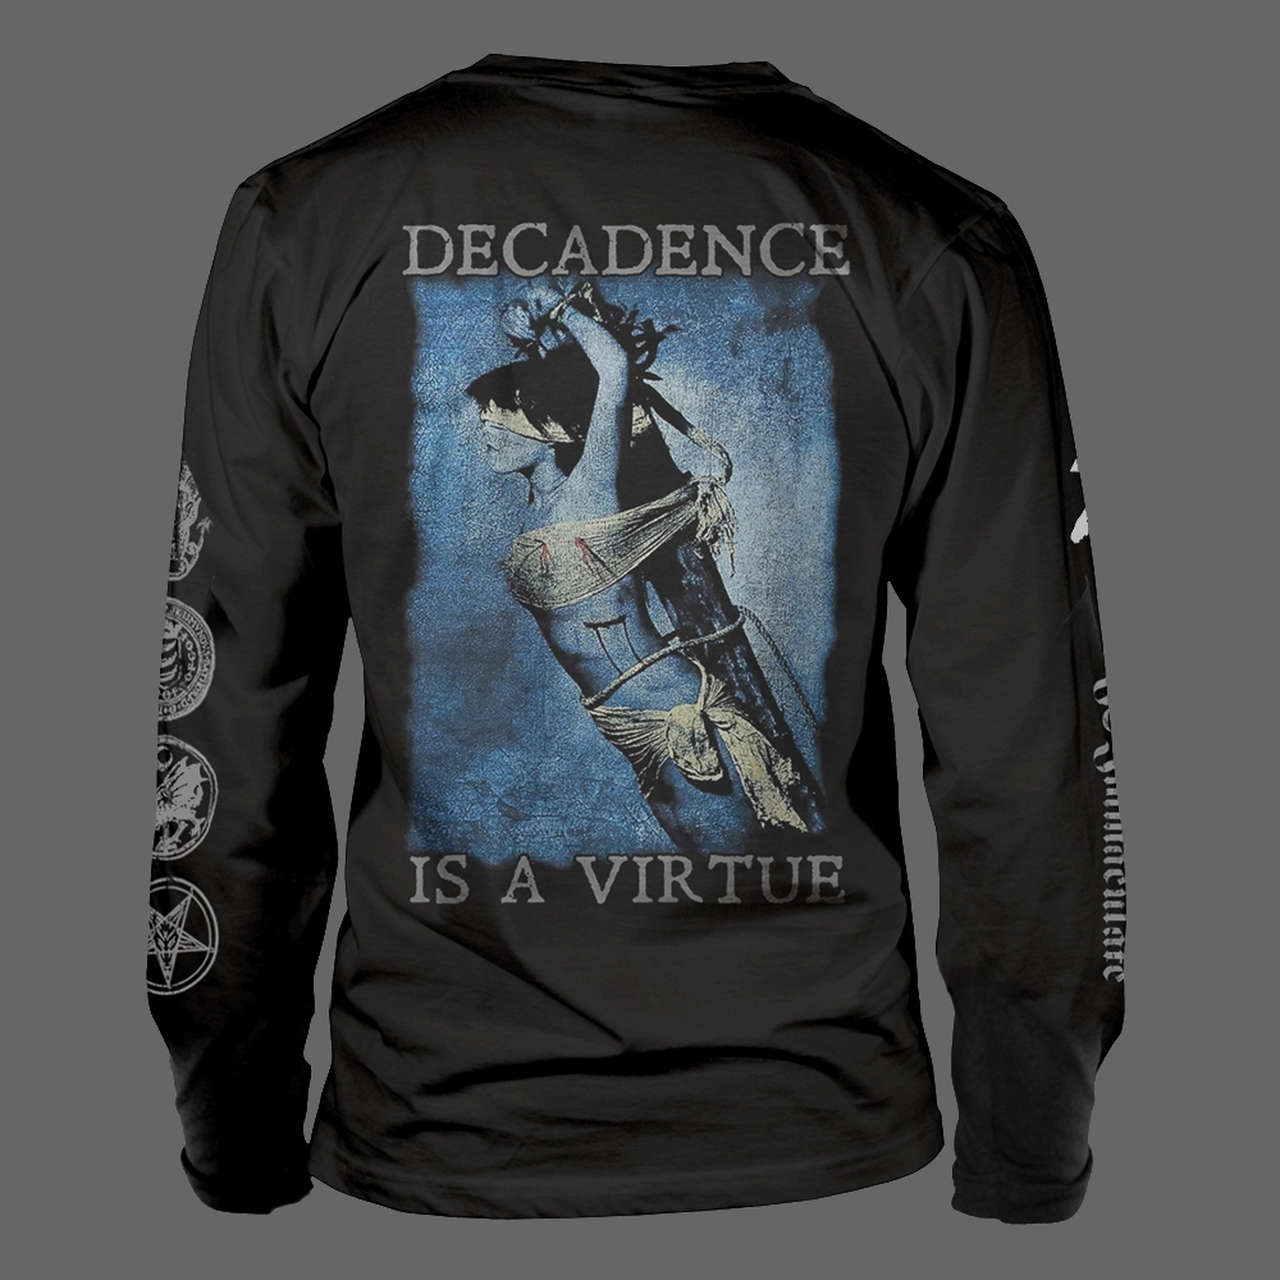 Cradle of Filth - Decadence is a Virtue (Long Sleeve T-Shirt)